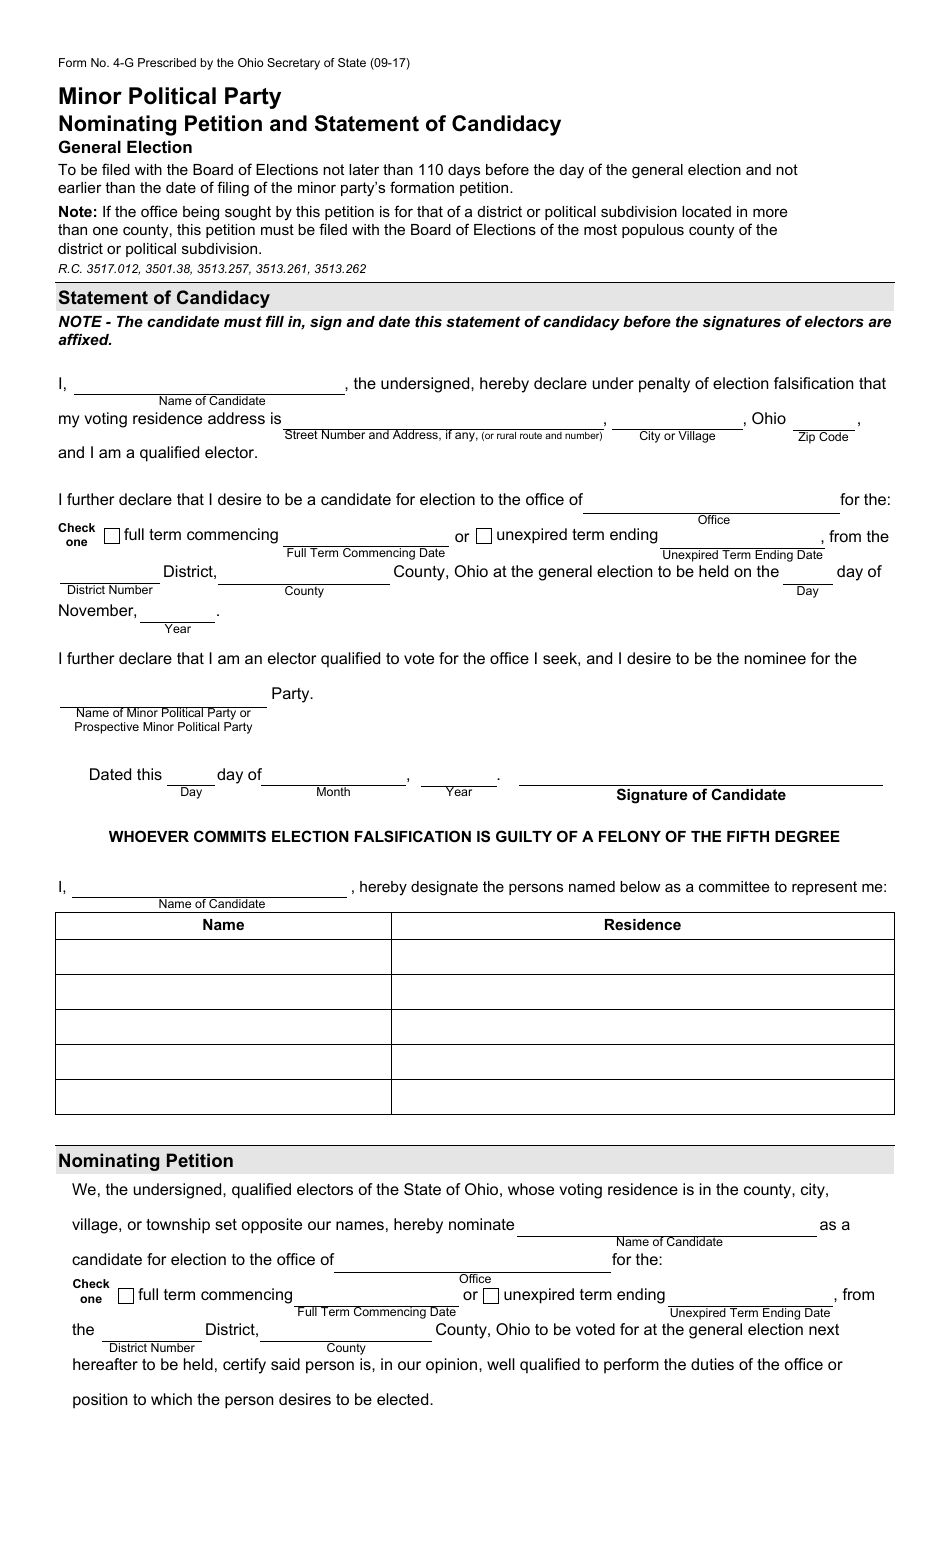 Form 4-G Minor Political Party Nominating Petition - General Election - Ohio, Page 1